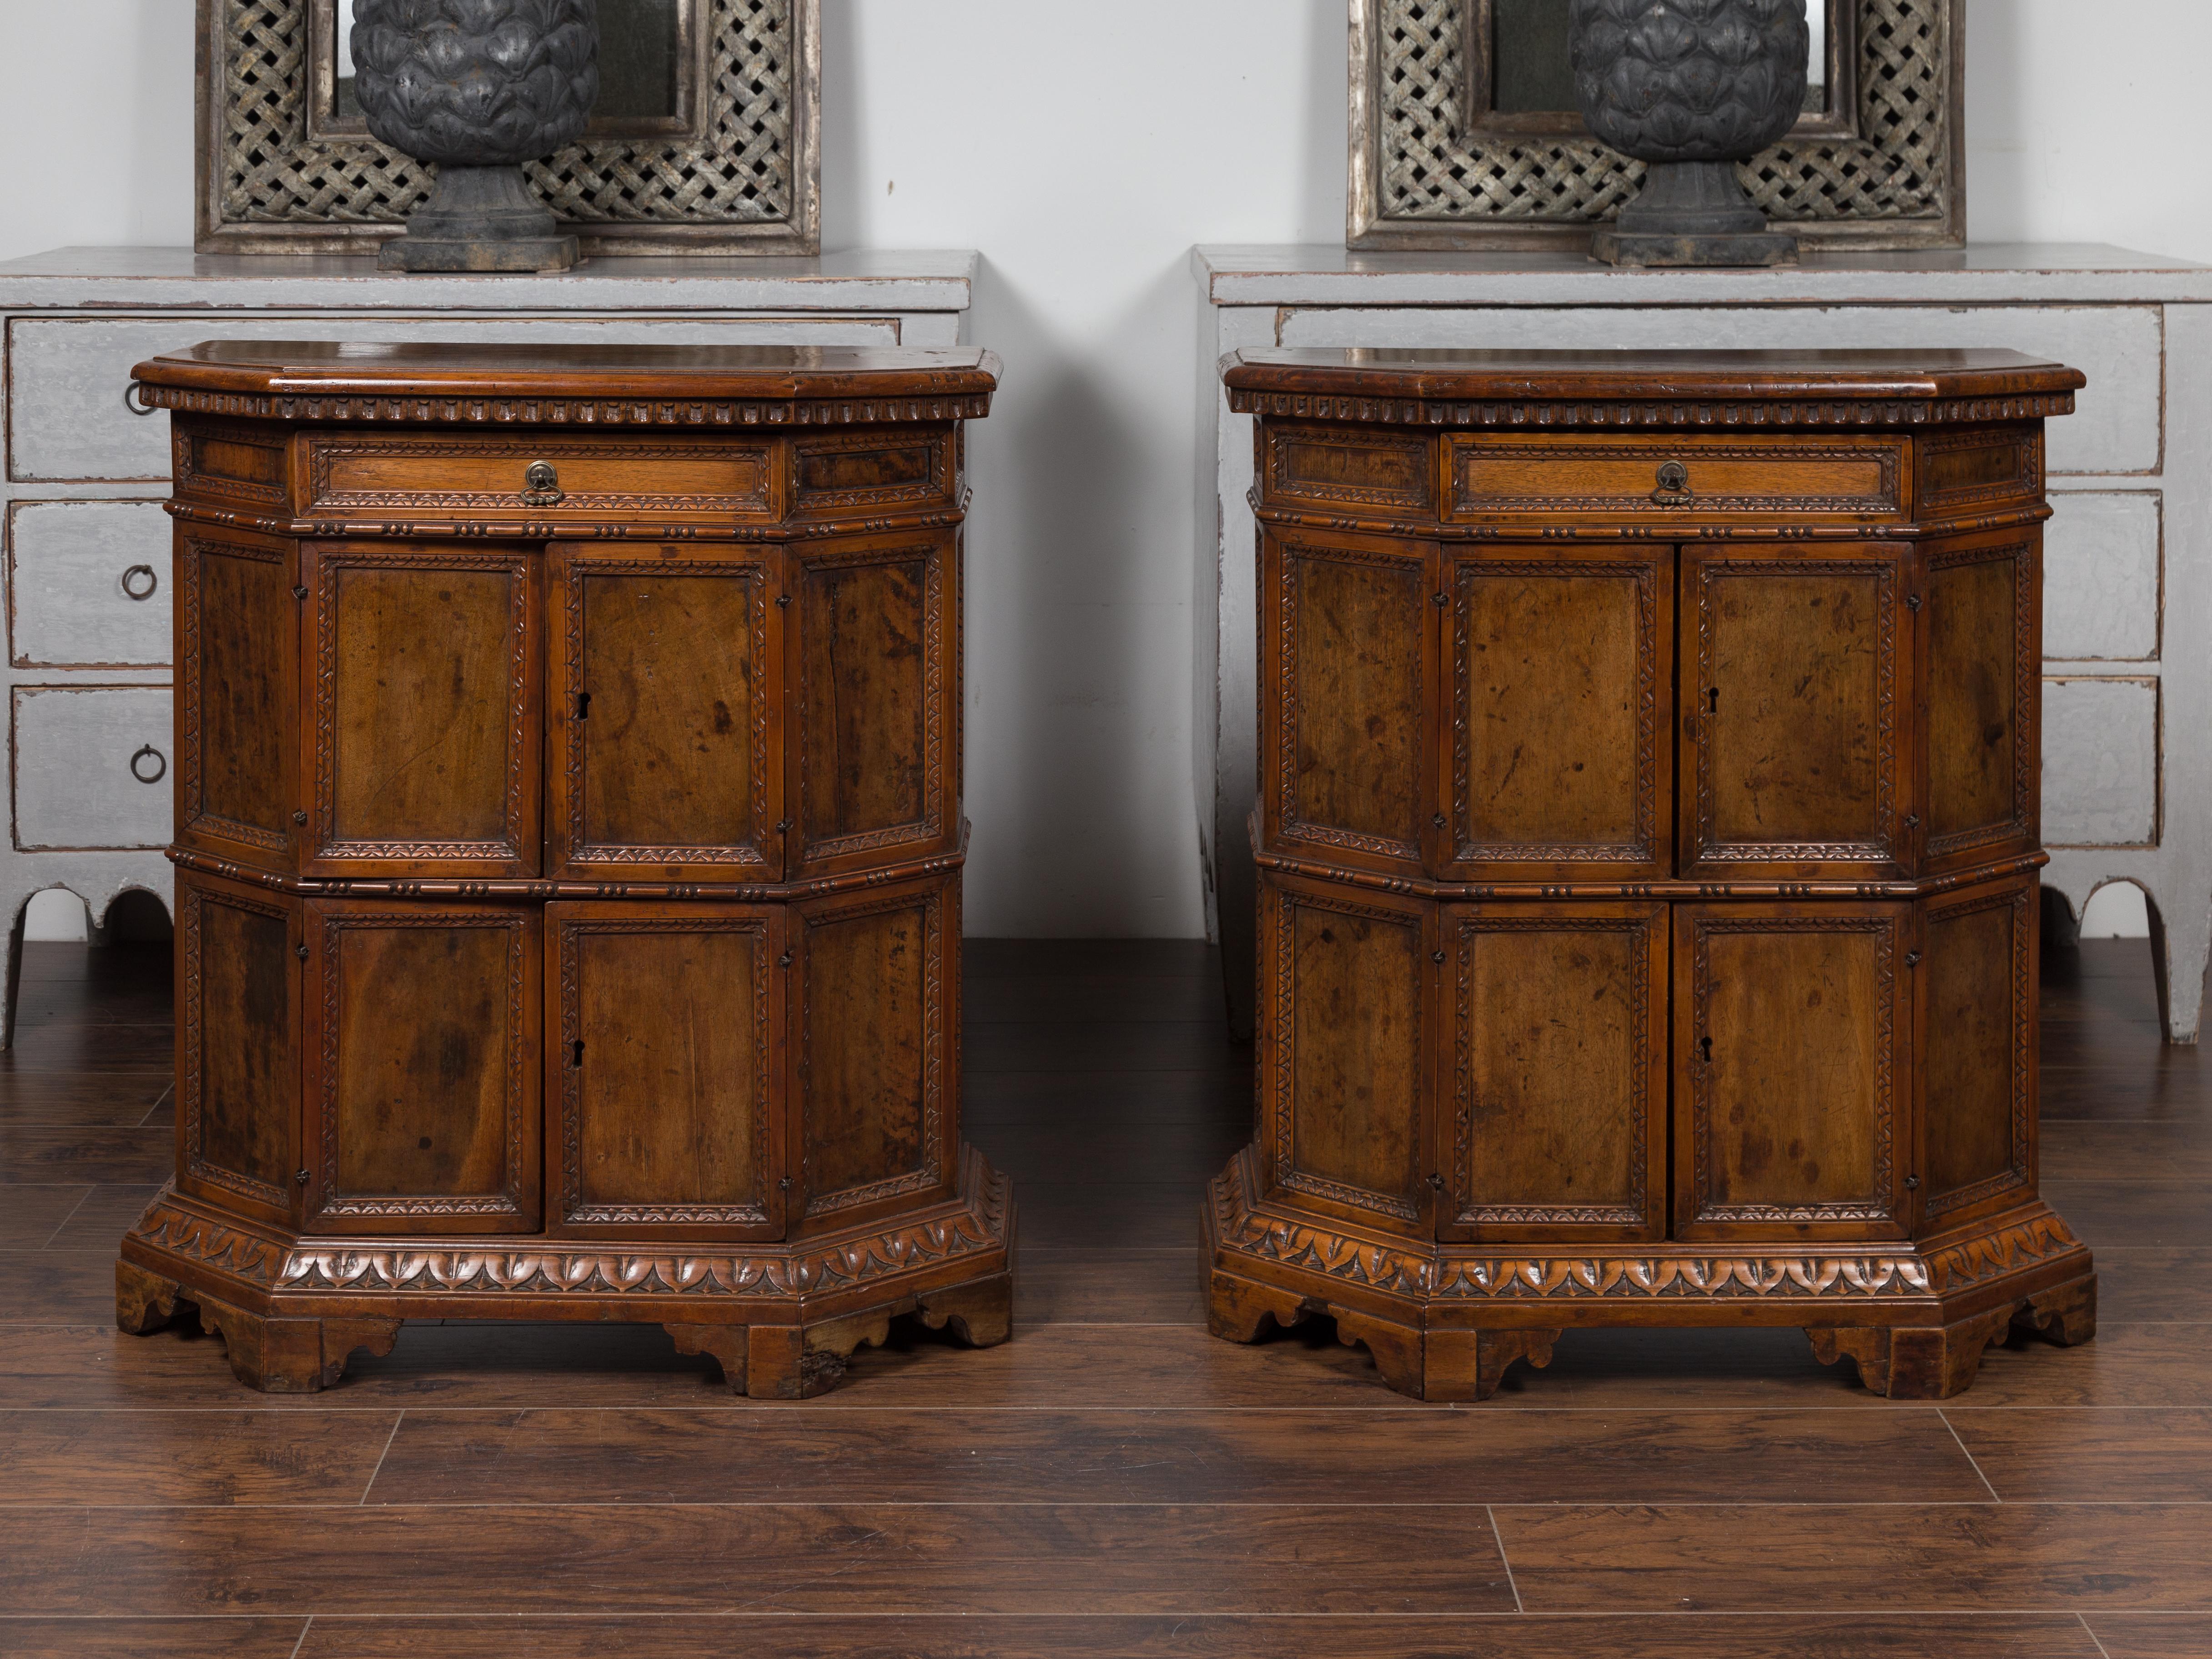 A pair of Italian walnut cabinets from the early 19th century, with canted sides, drawers, doors and carved motifs. Born in Italy during the early years of the 19th century, each of this pair of cabinets features a polygonal top sitting above a